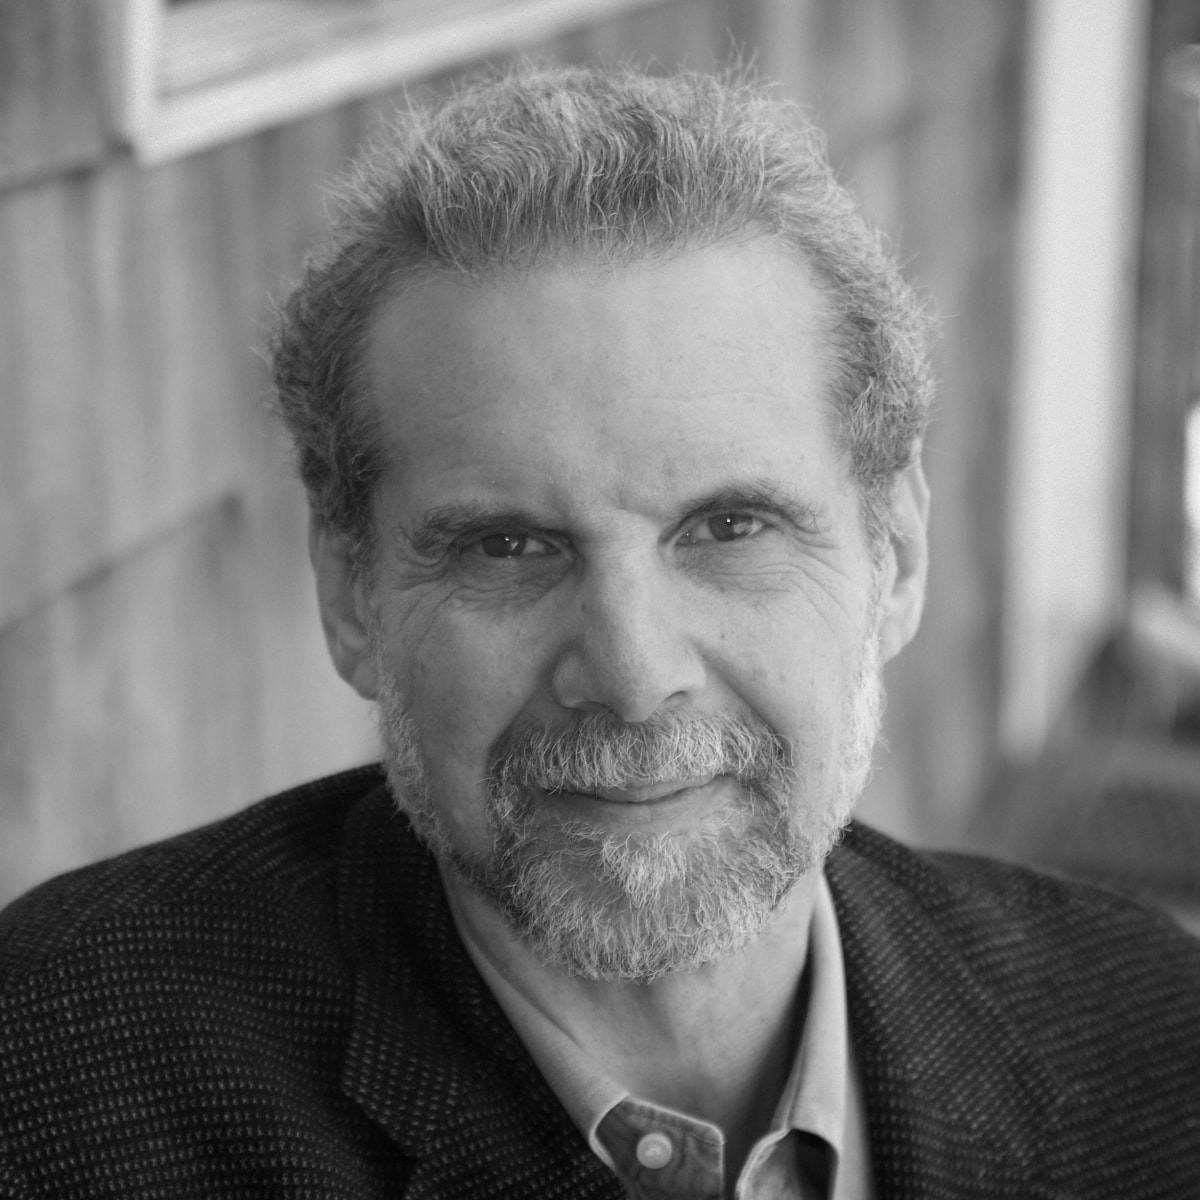 Daniel Goleman, Author, Psychologist and Science journalist; The New York Times Co.